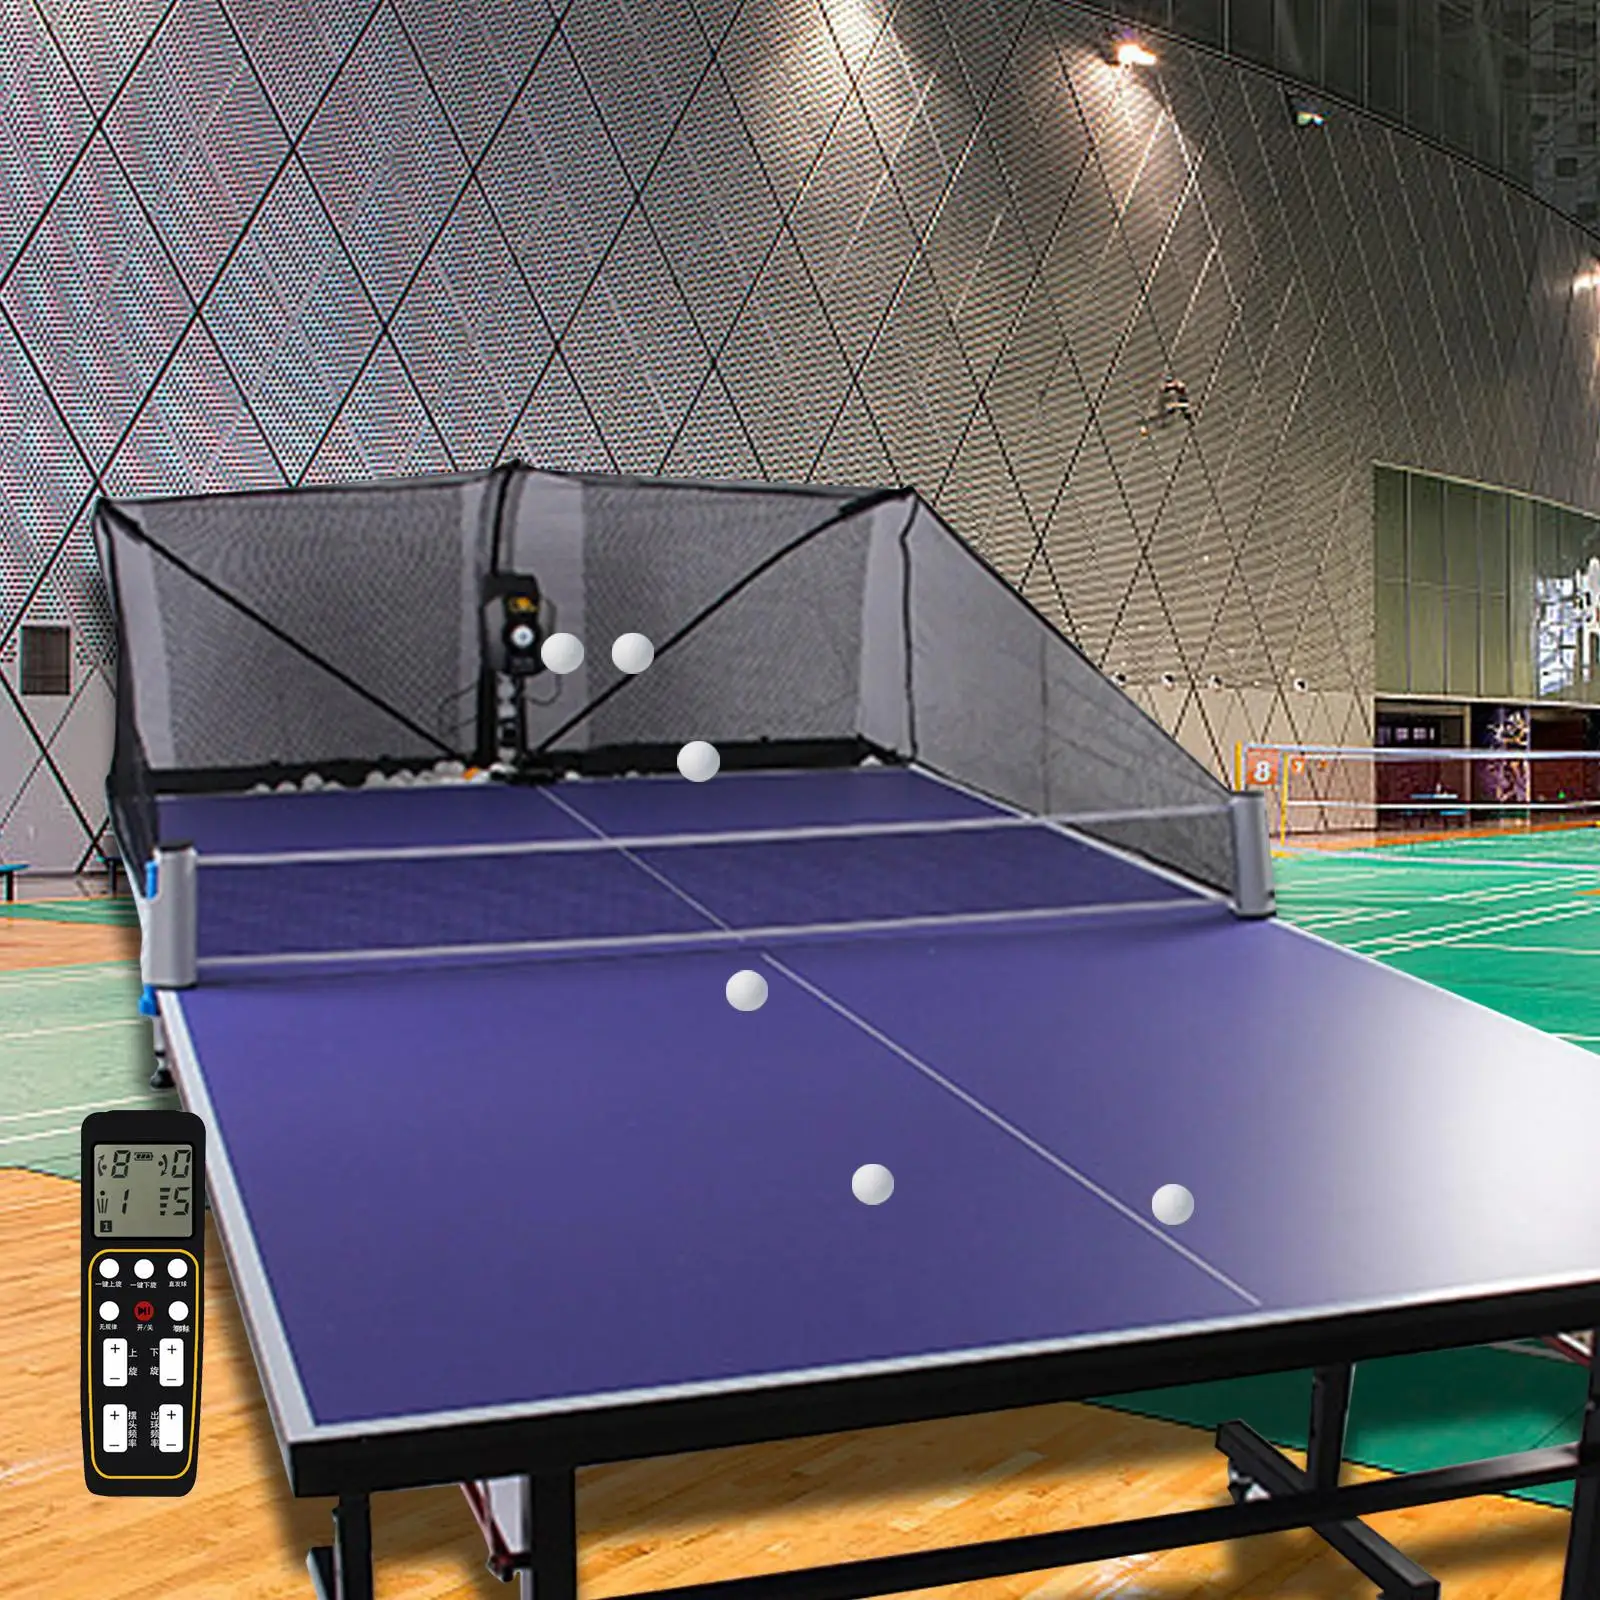 

Ping Pong Ball Machine with Table Tennis Balls Ping Pong Robot Server Table Tennis Automatic Ball Serving Machine for Player